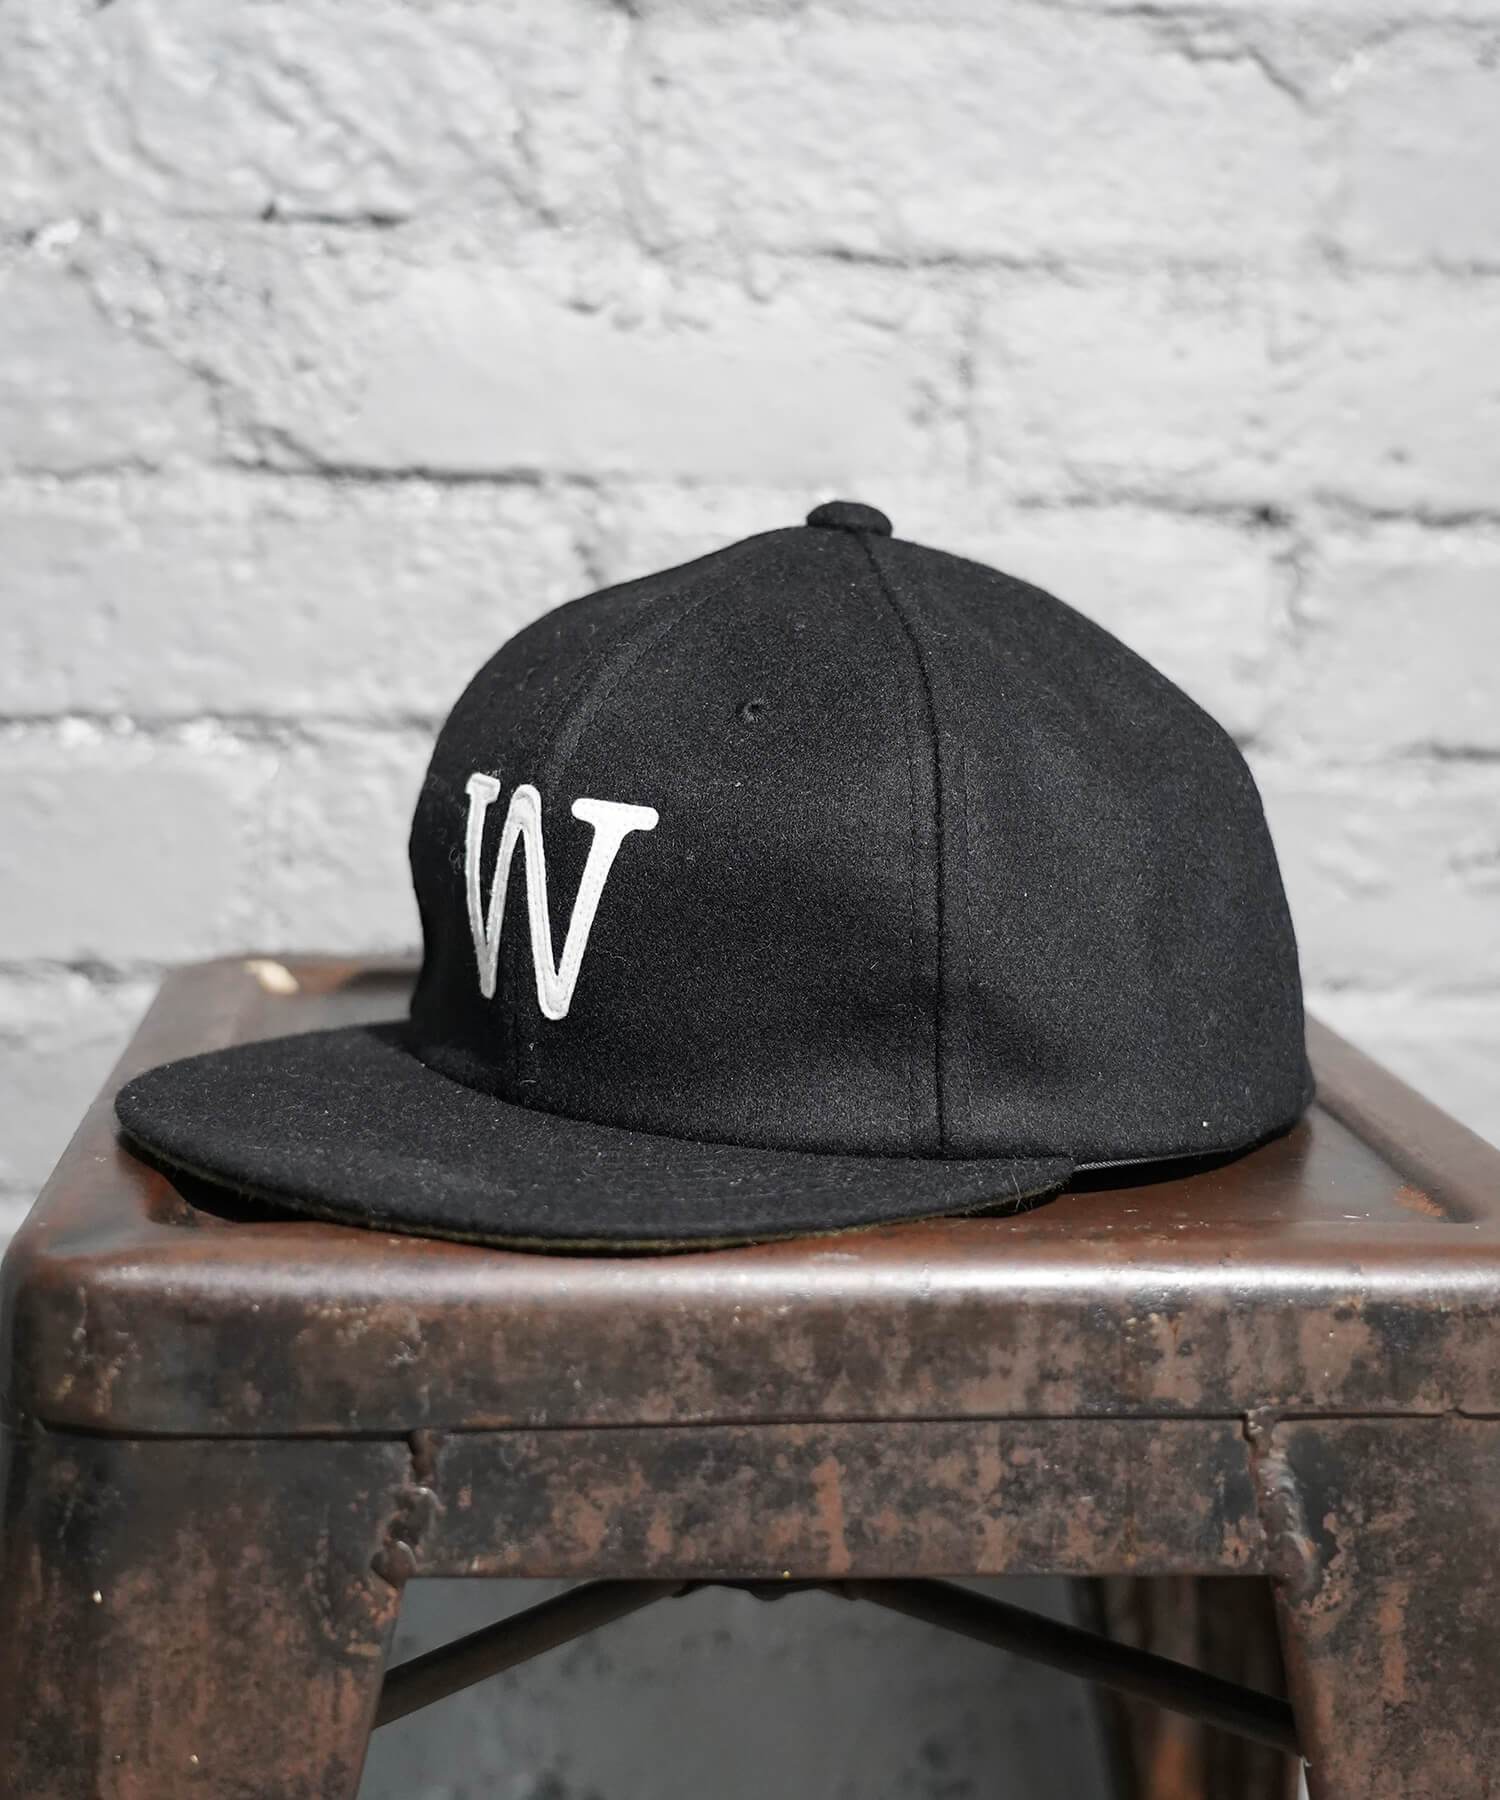 Wolfman BB Wool Cap / Collaboration with WOLFMAN BARBER SHOP